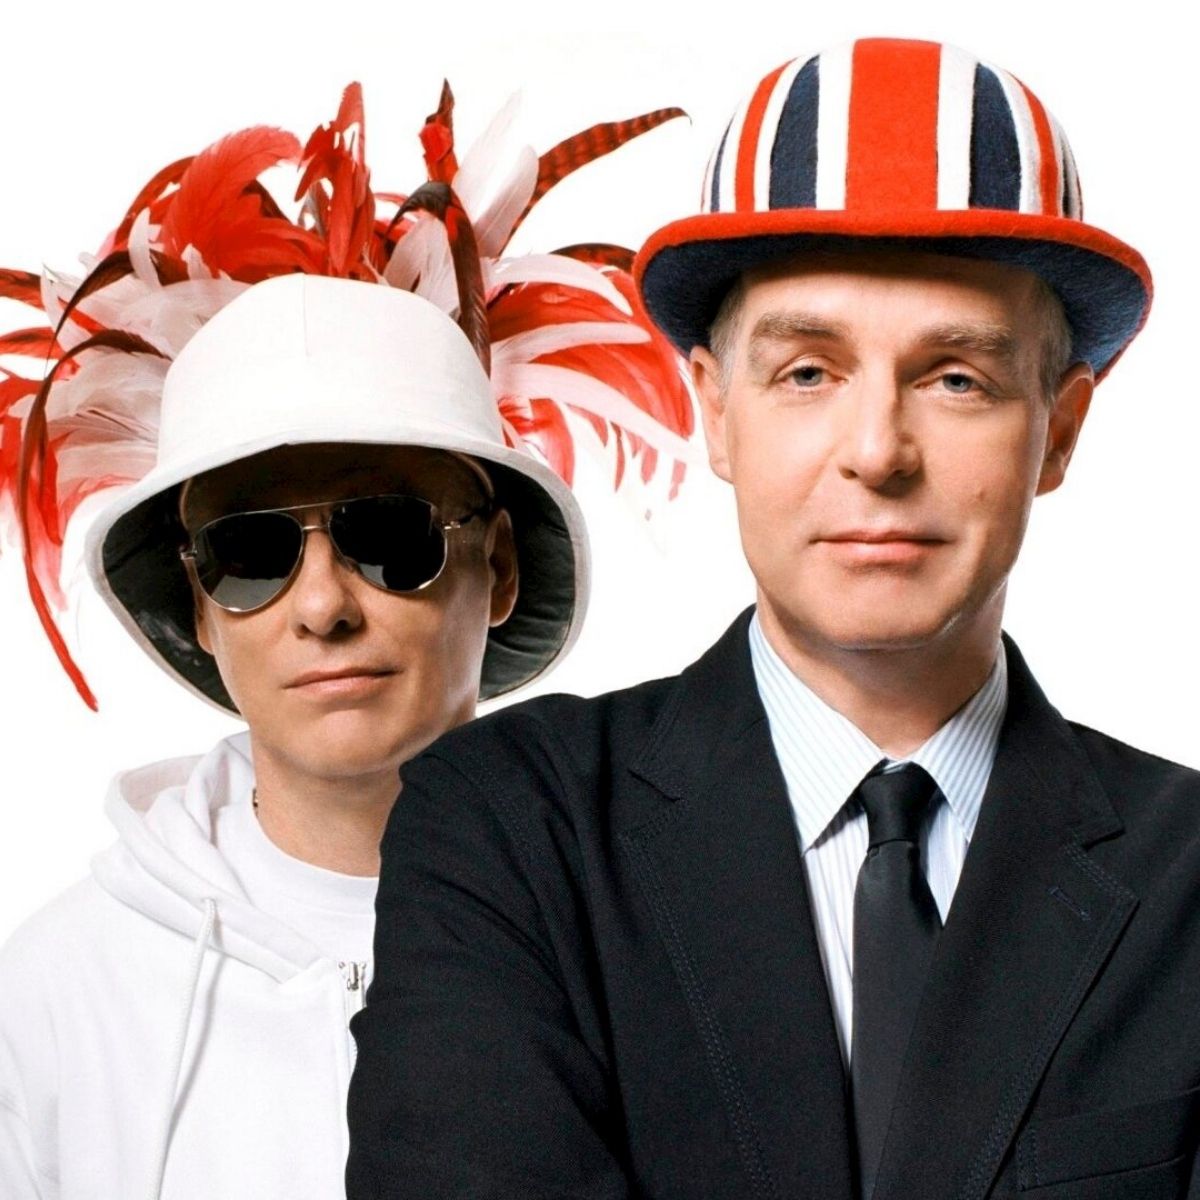 "Pet Shop Boys" on the cover of the billboard for their concert in Zurich